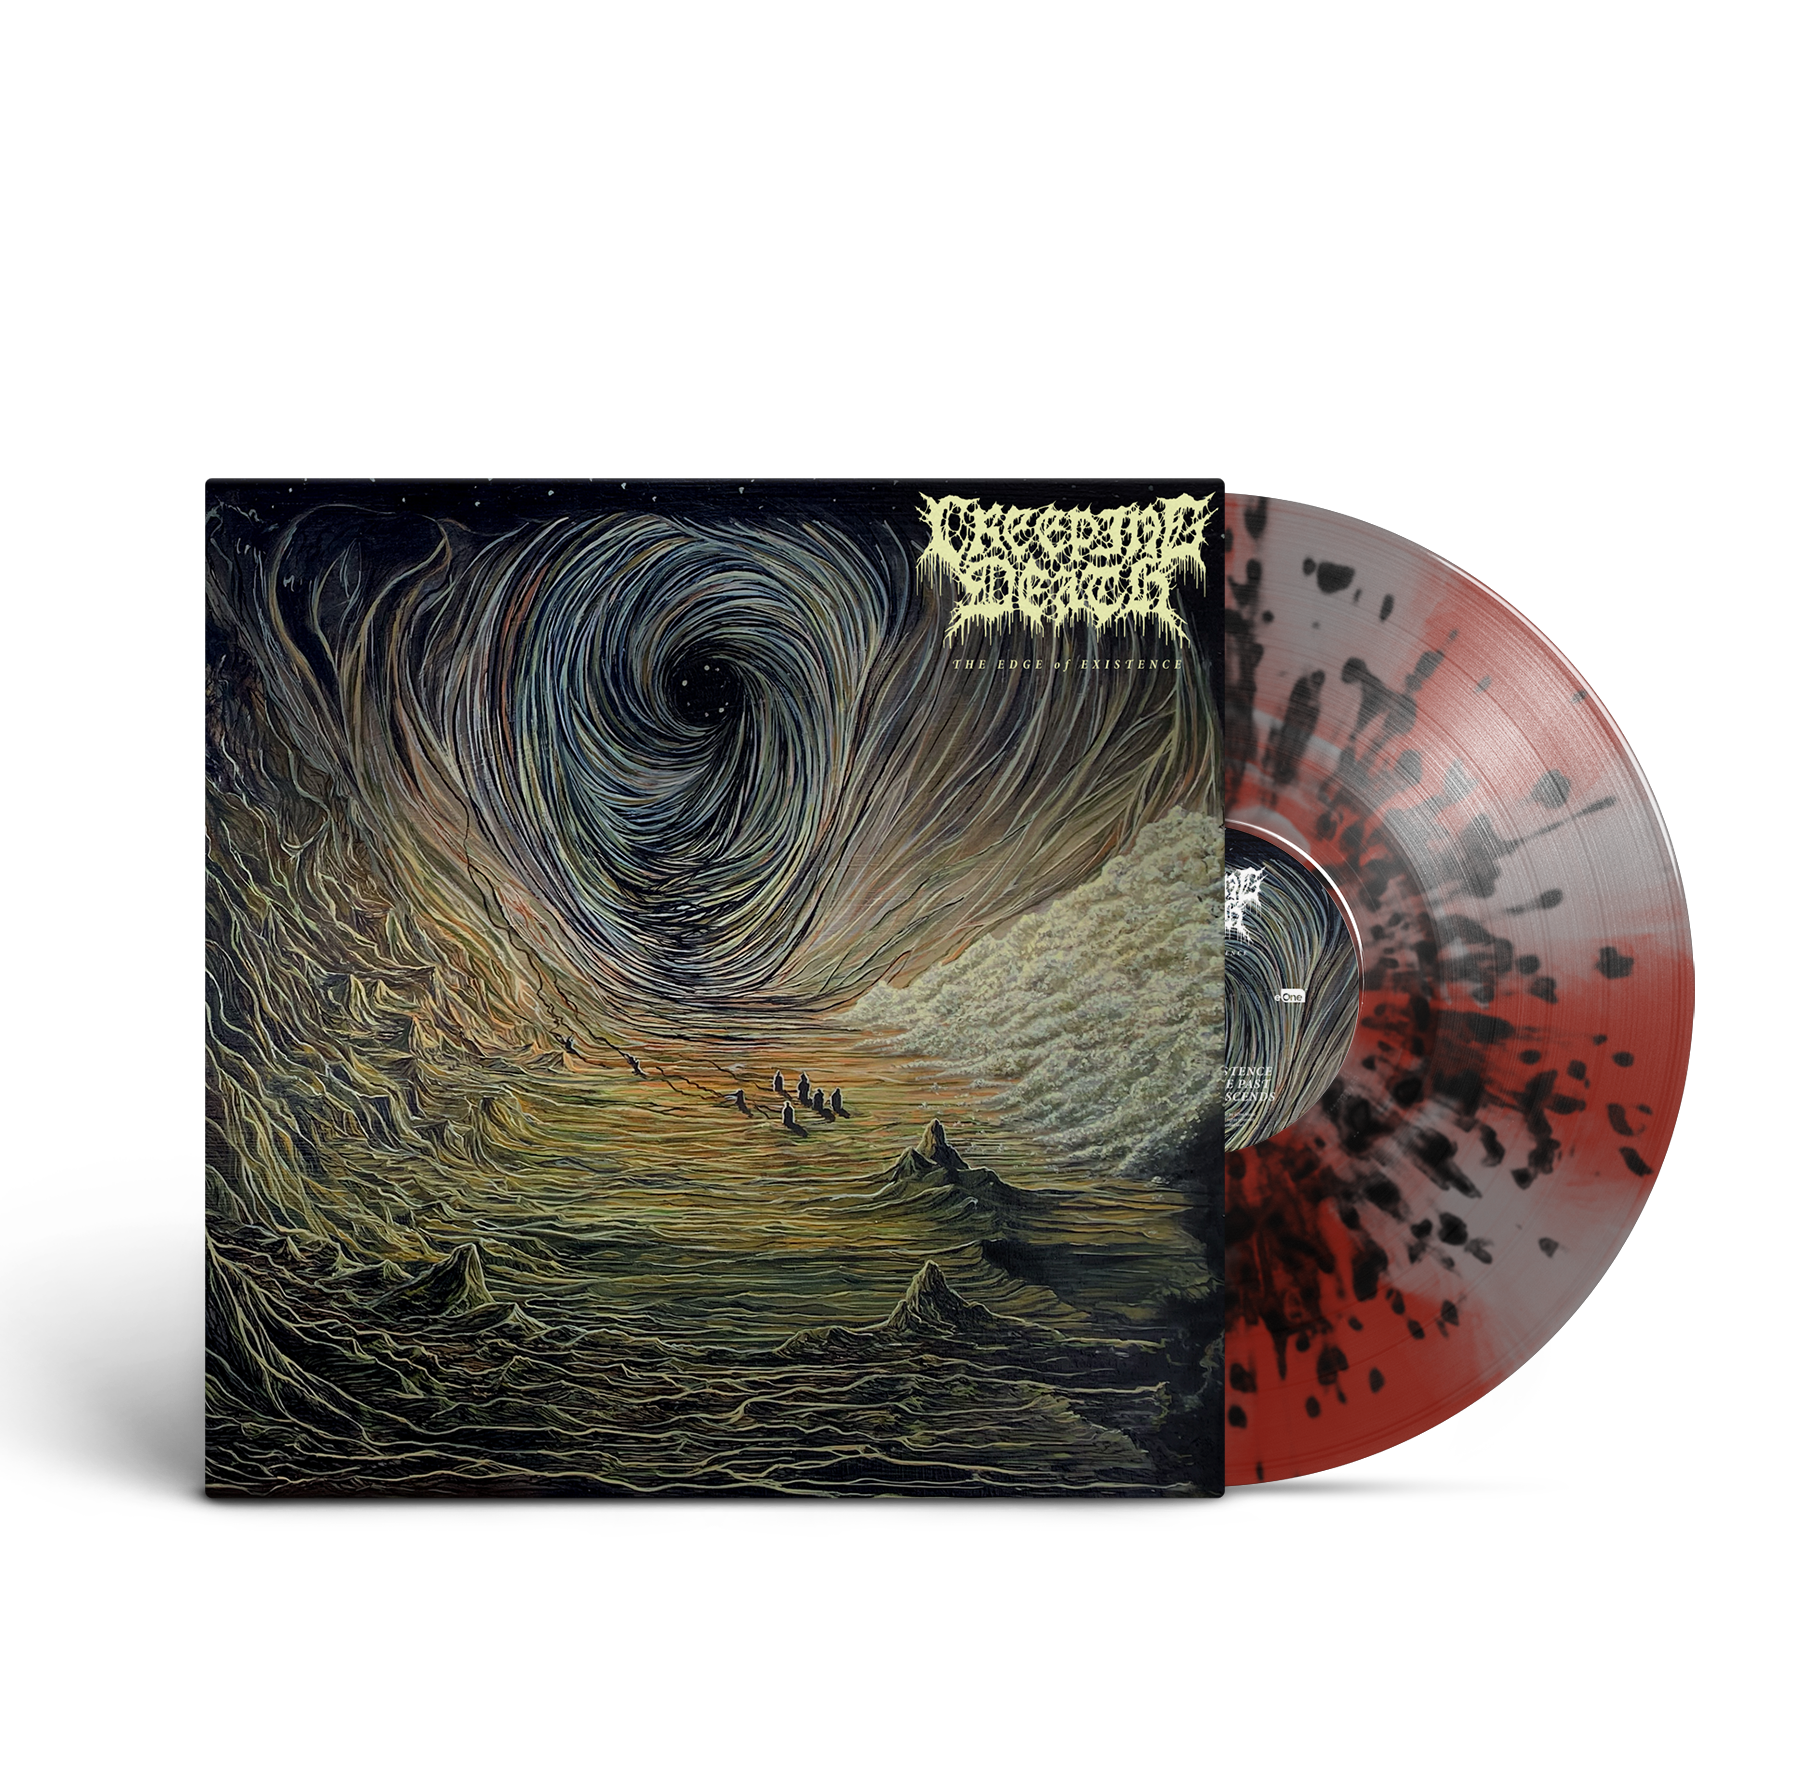 Creeping Death - The Edge Of Existence; Ruby and grey pinwheel with black splatter vinyl